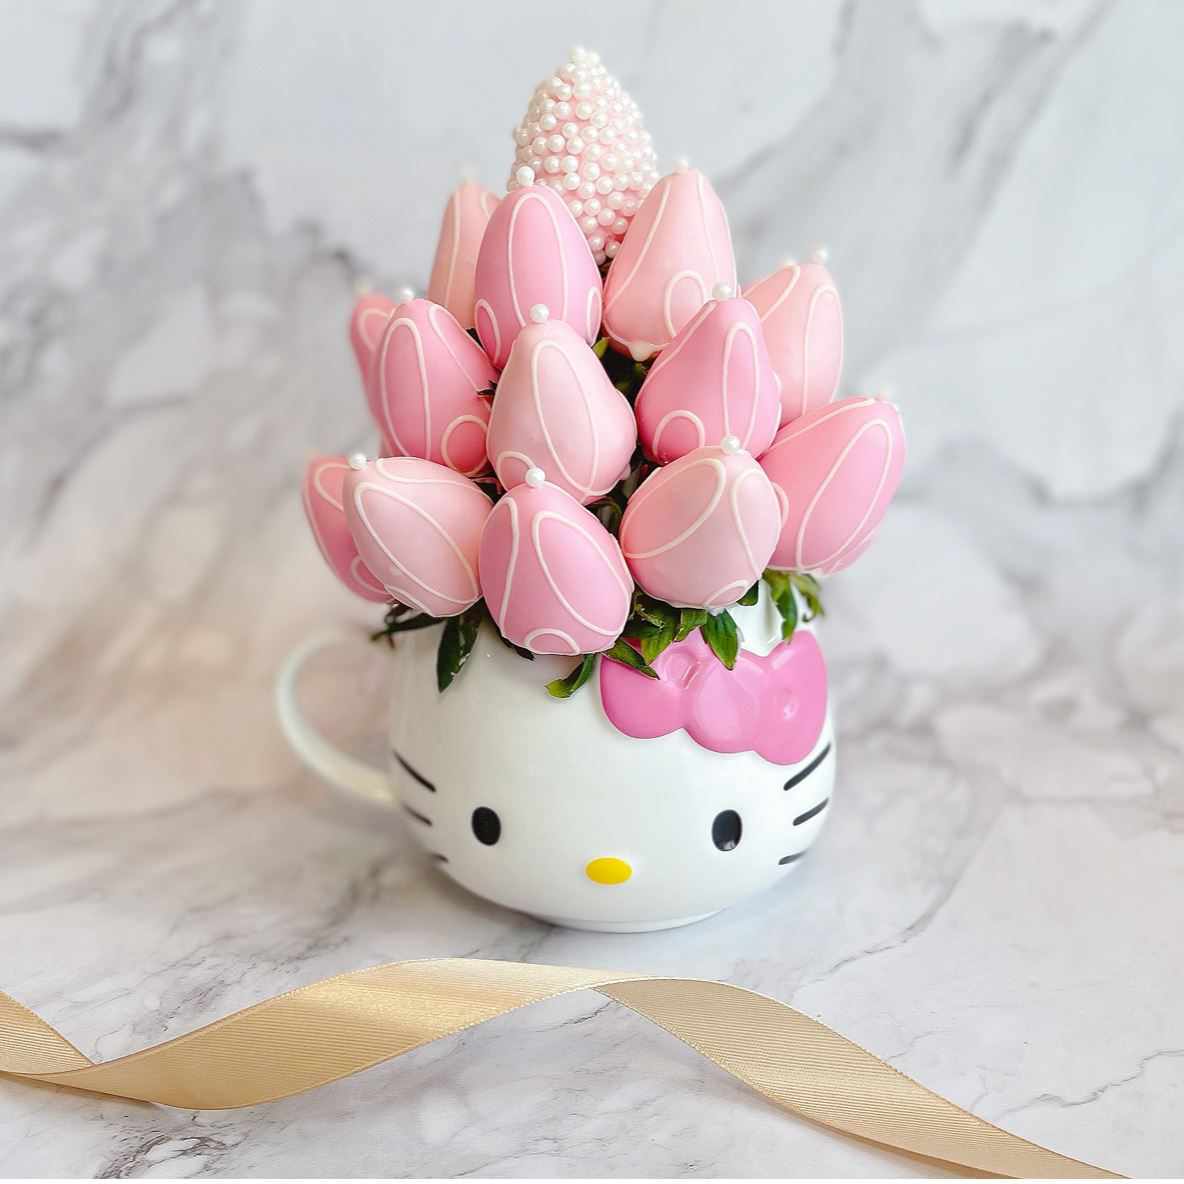 Pink Kitty Strawberry Bouquet Fresh Fruit Arrangement with Chocolate Coated Strawberries (Hello Kitty Inspired) - Rainbowly Fresh Fruit Gift and Flower Arrangments